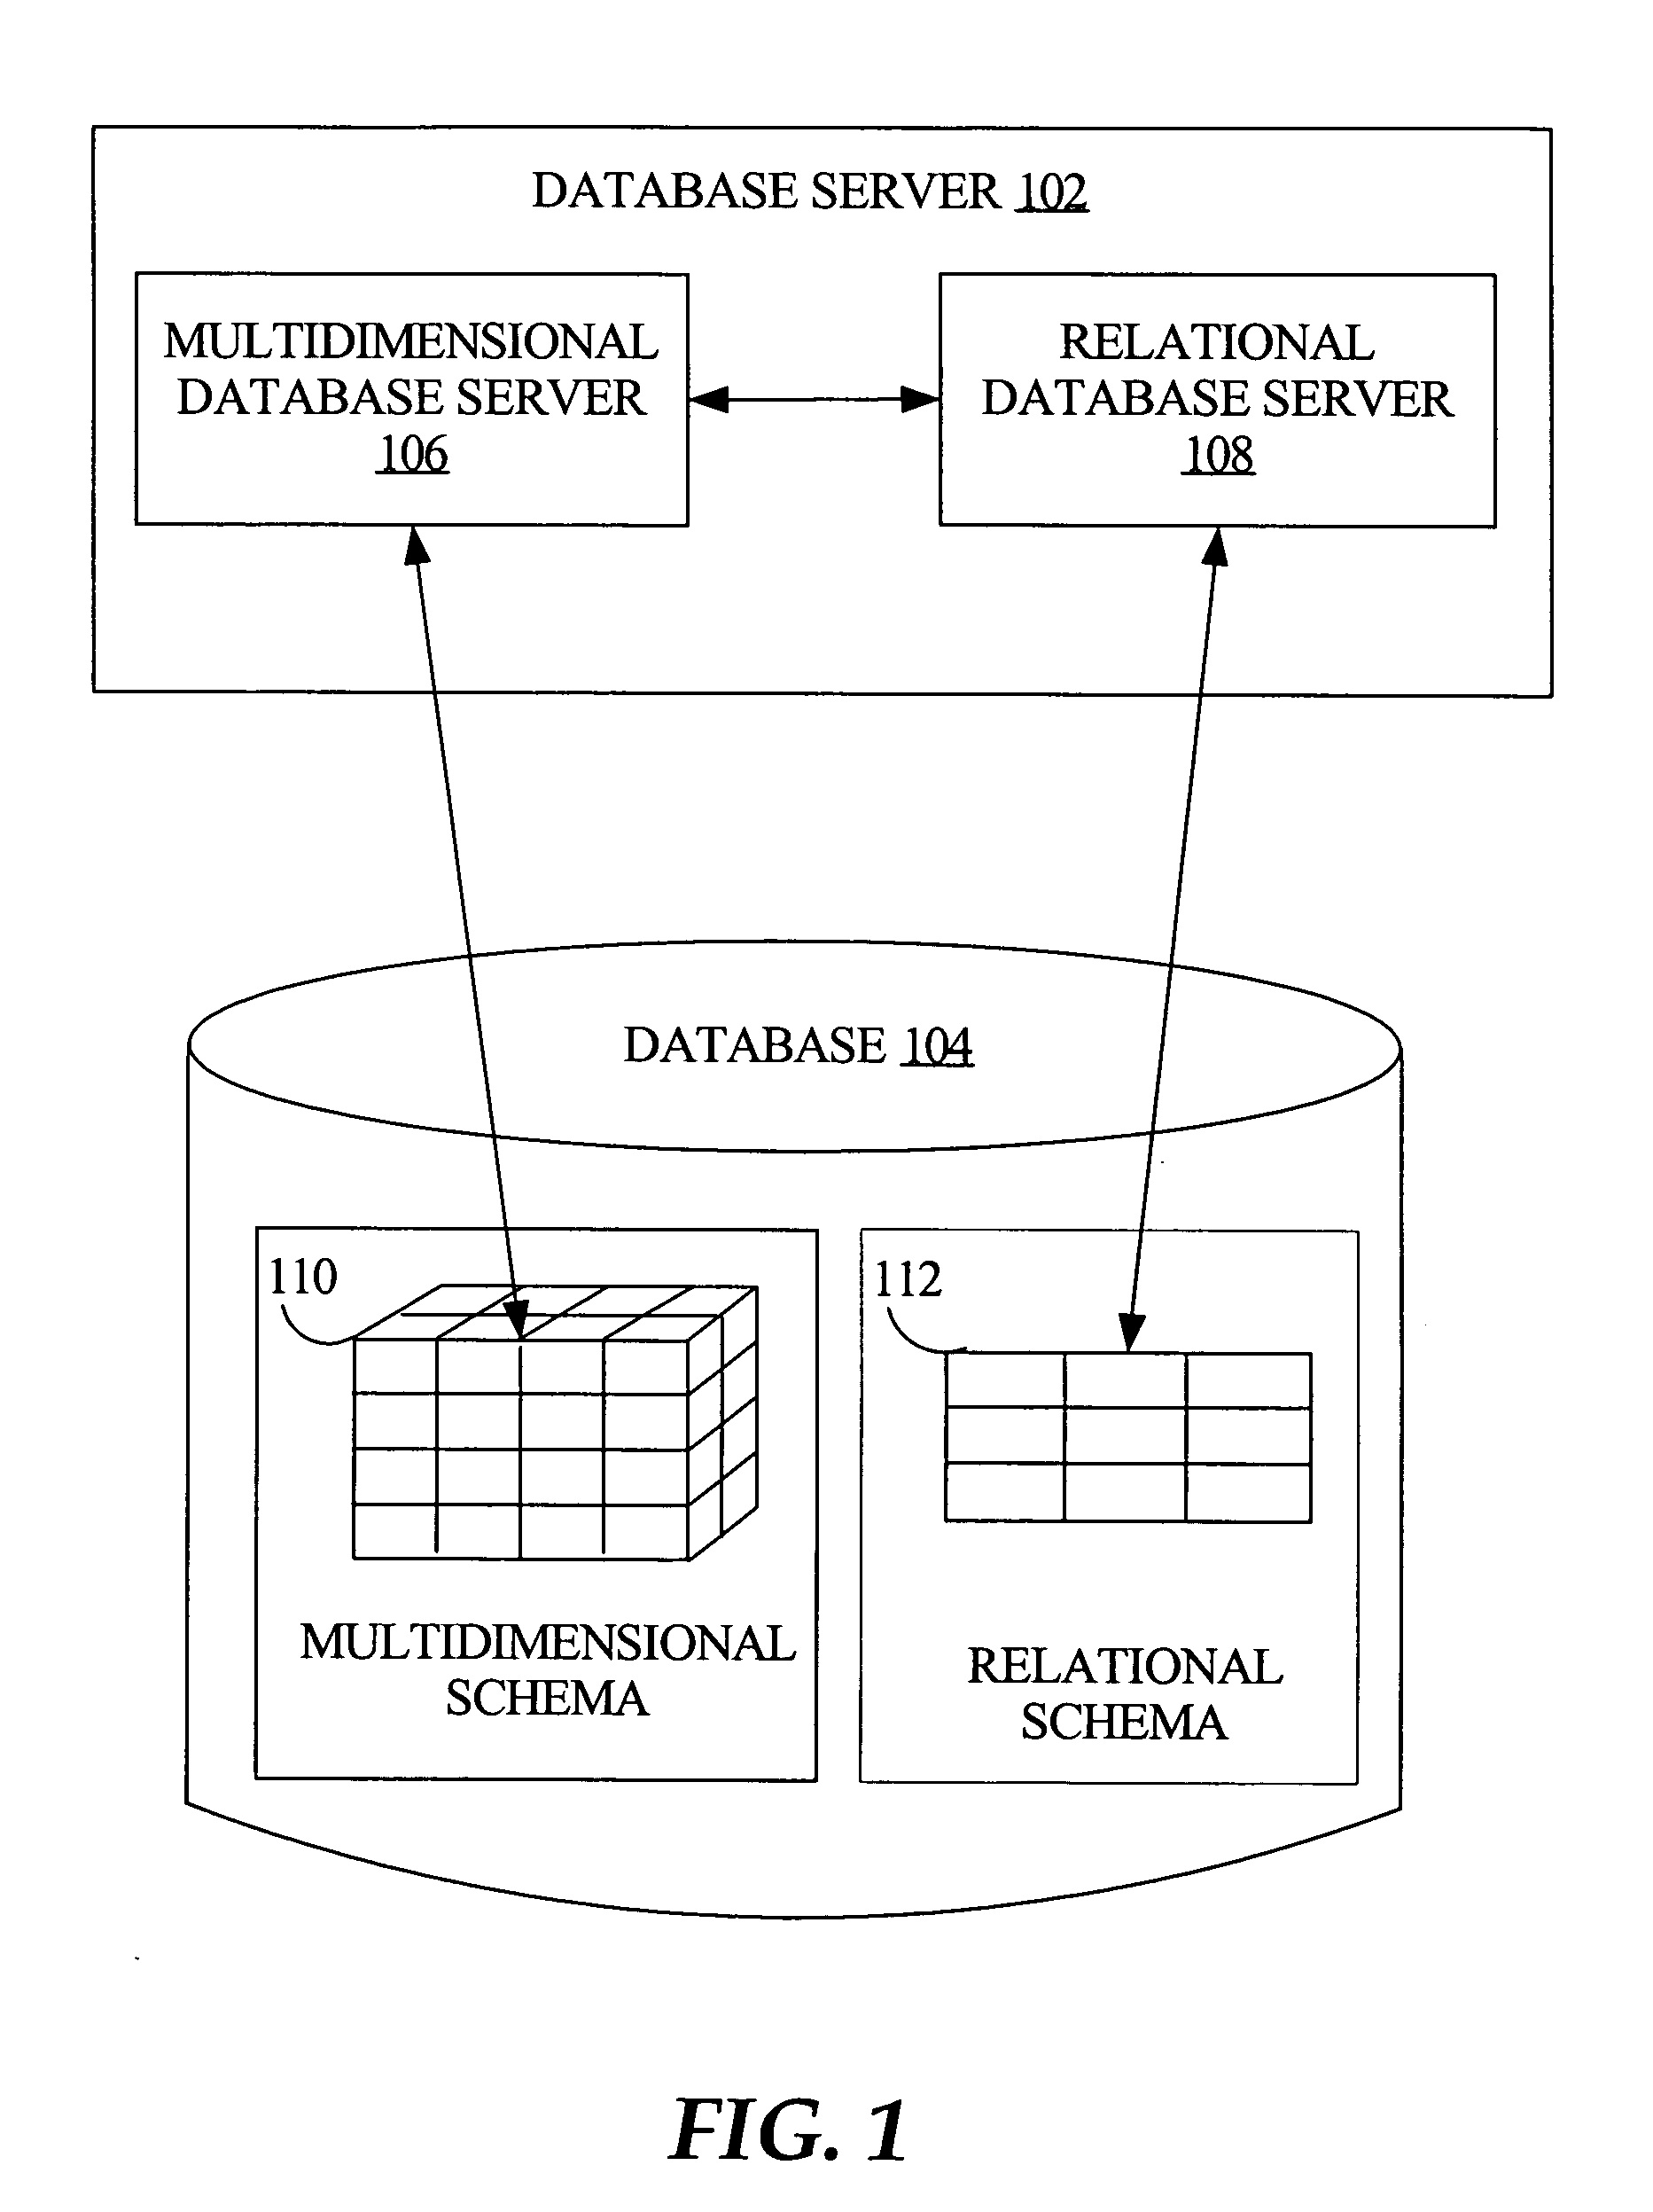 Efficient processing of relational joins of multidimensional data